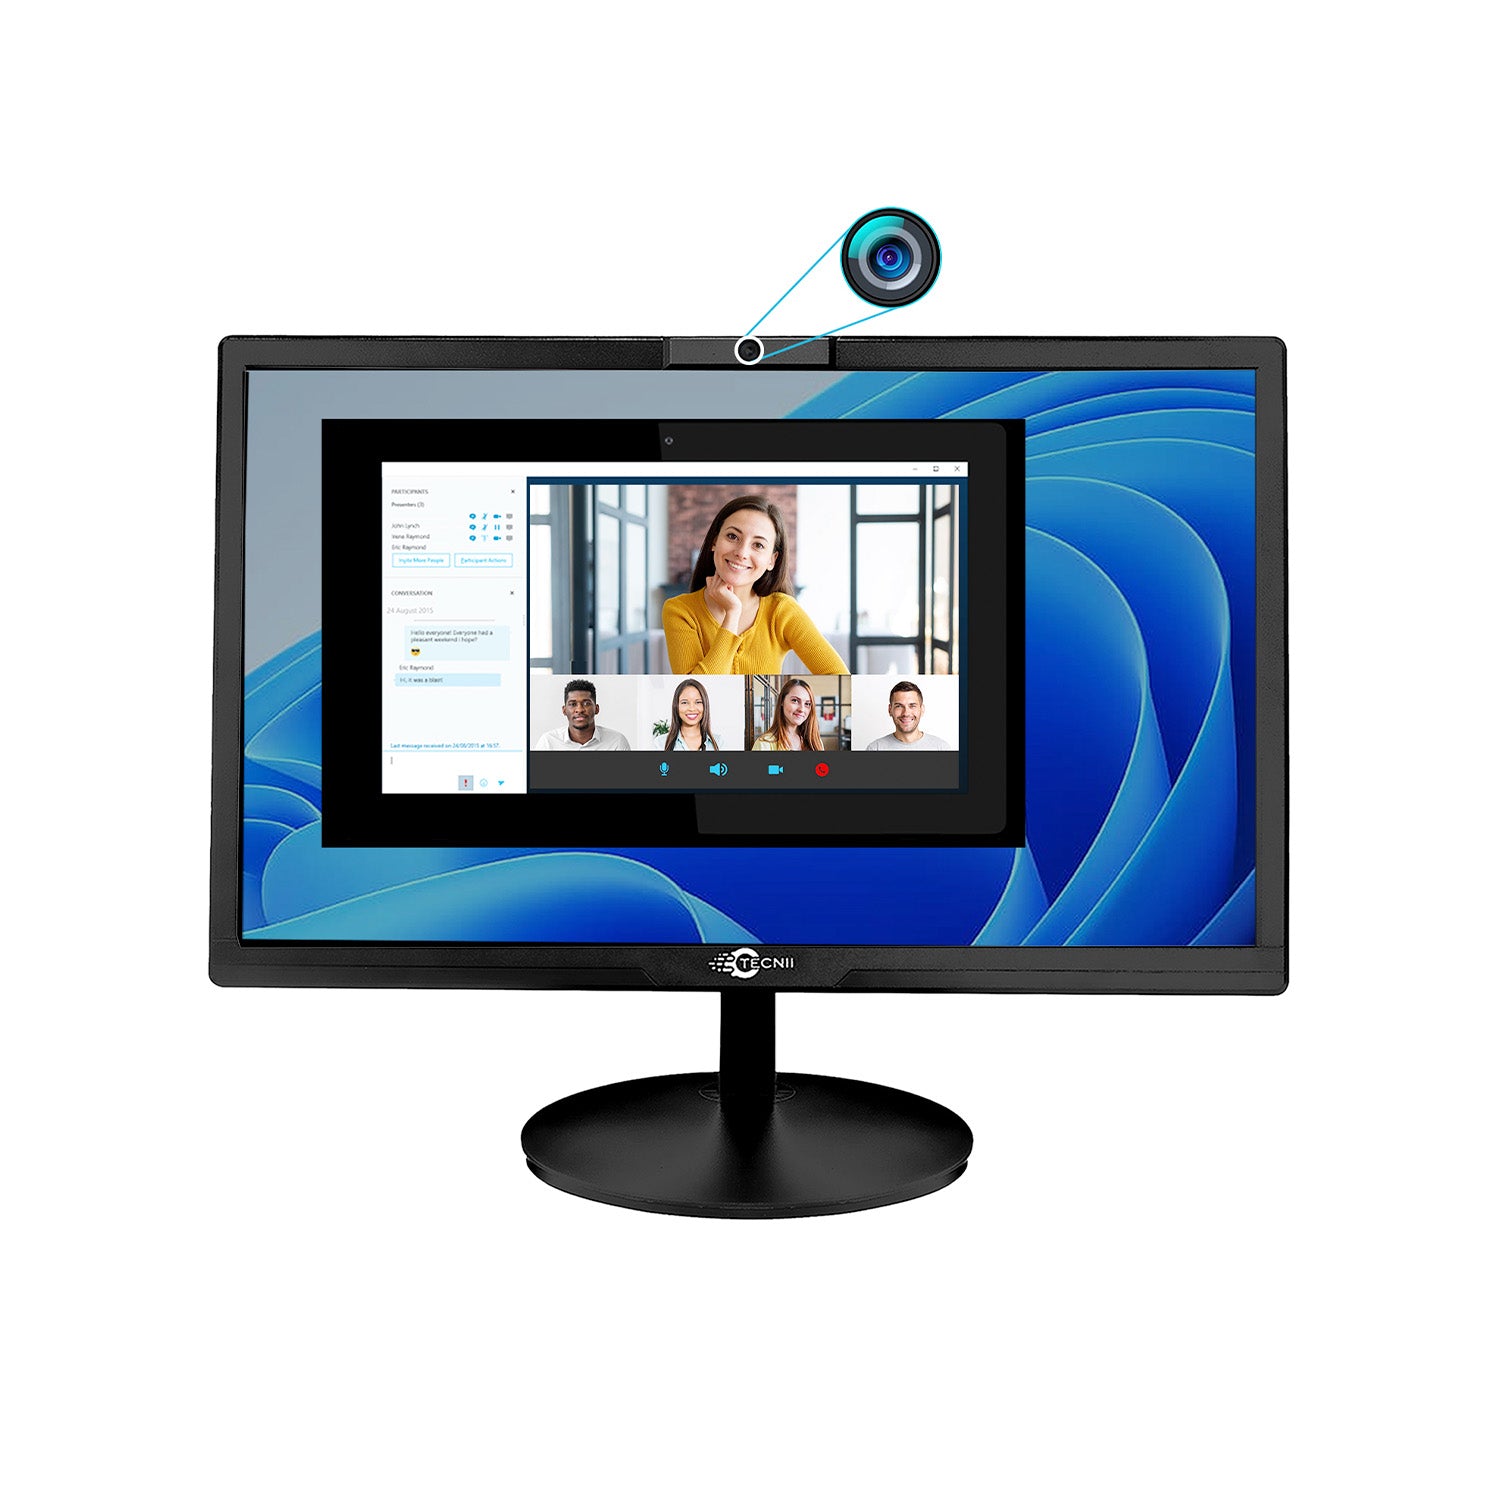 TECNII 20” Inch Video Conferencing Monitor HD+ (1600 x 900 Resolution) LED-Backlit, Built-in WebCam, Microphones, Speakers 60Hz, Wall Mountable | HDMI VGA Inputs for Home and Office-Black (2022W)